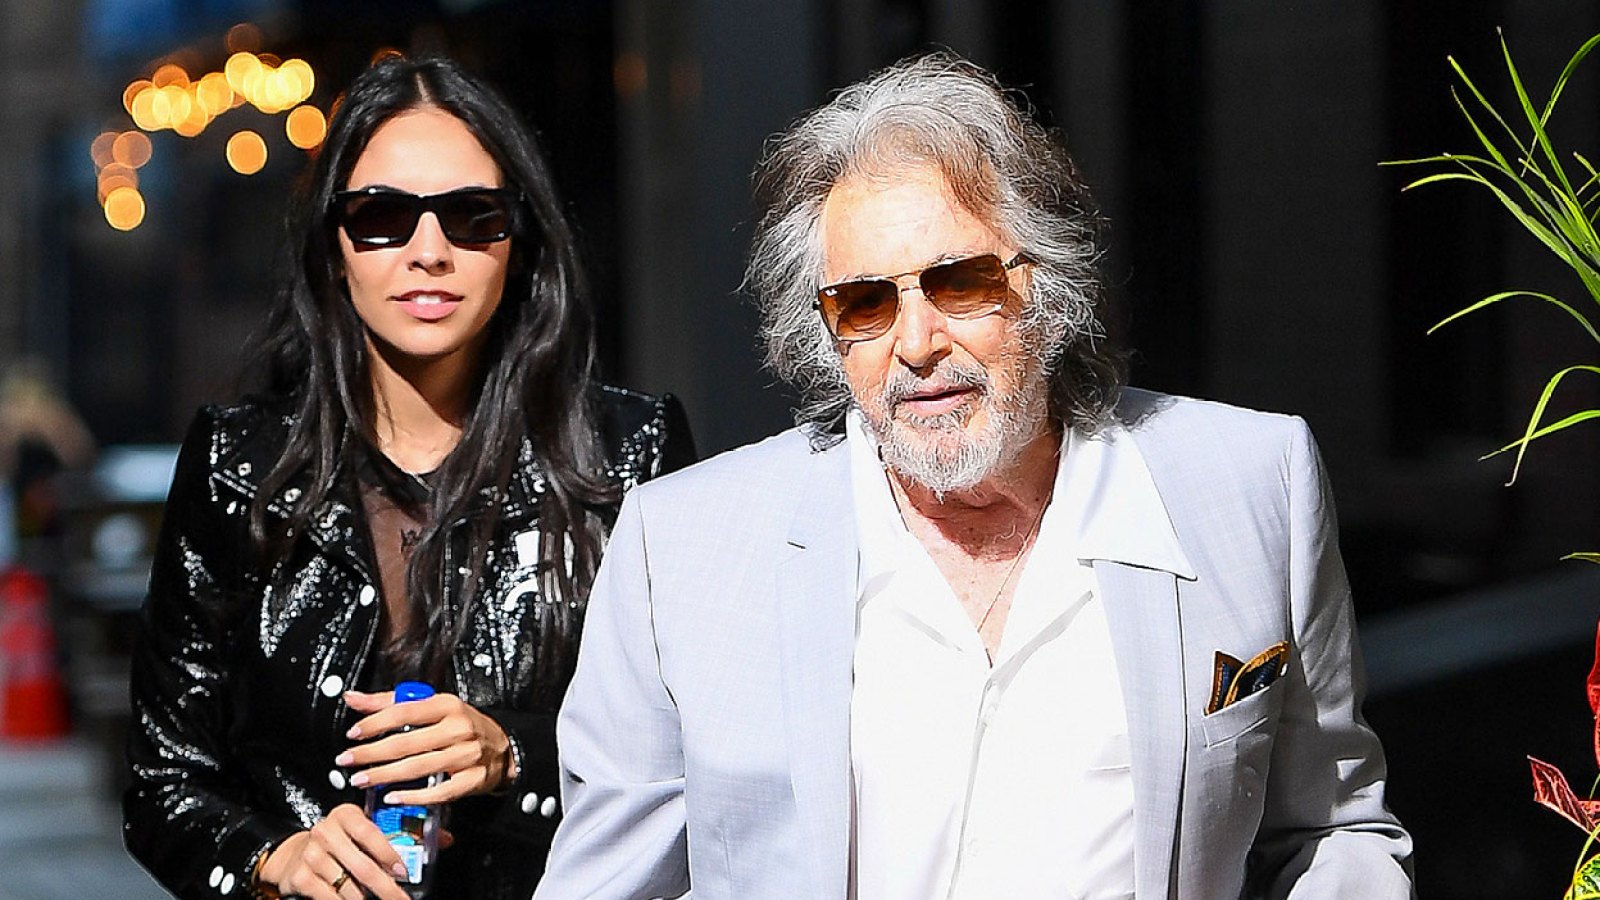 Al Pacino Girlfriend Noor Alfallah Files for Sole Physical Custody of Their 3-Month-Old Son